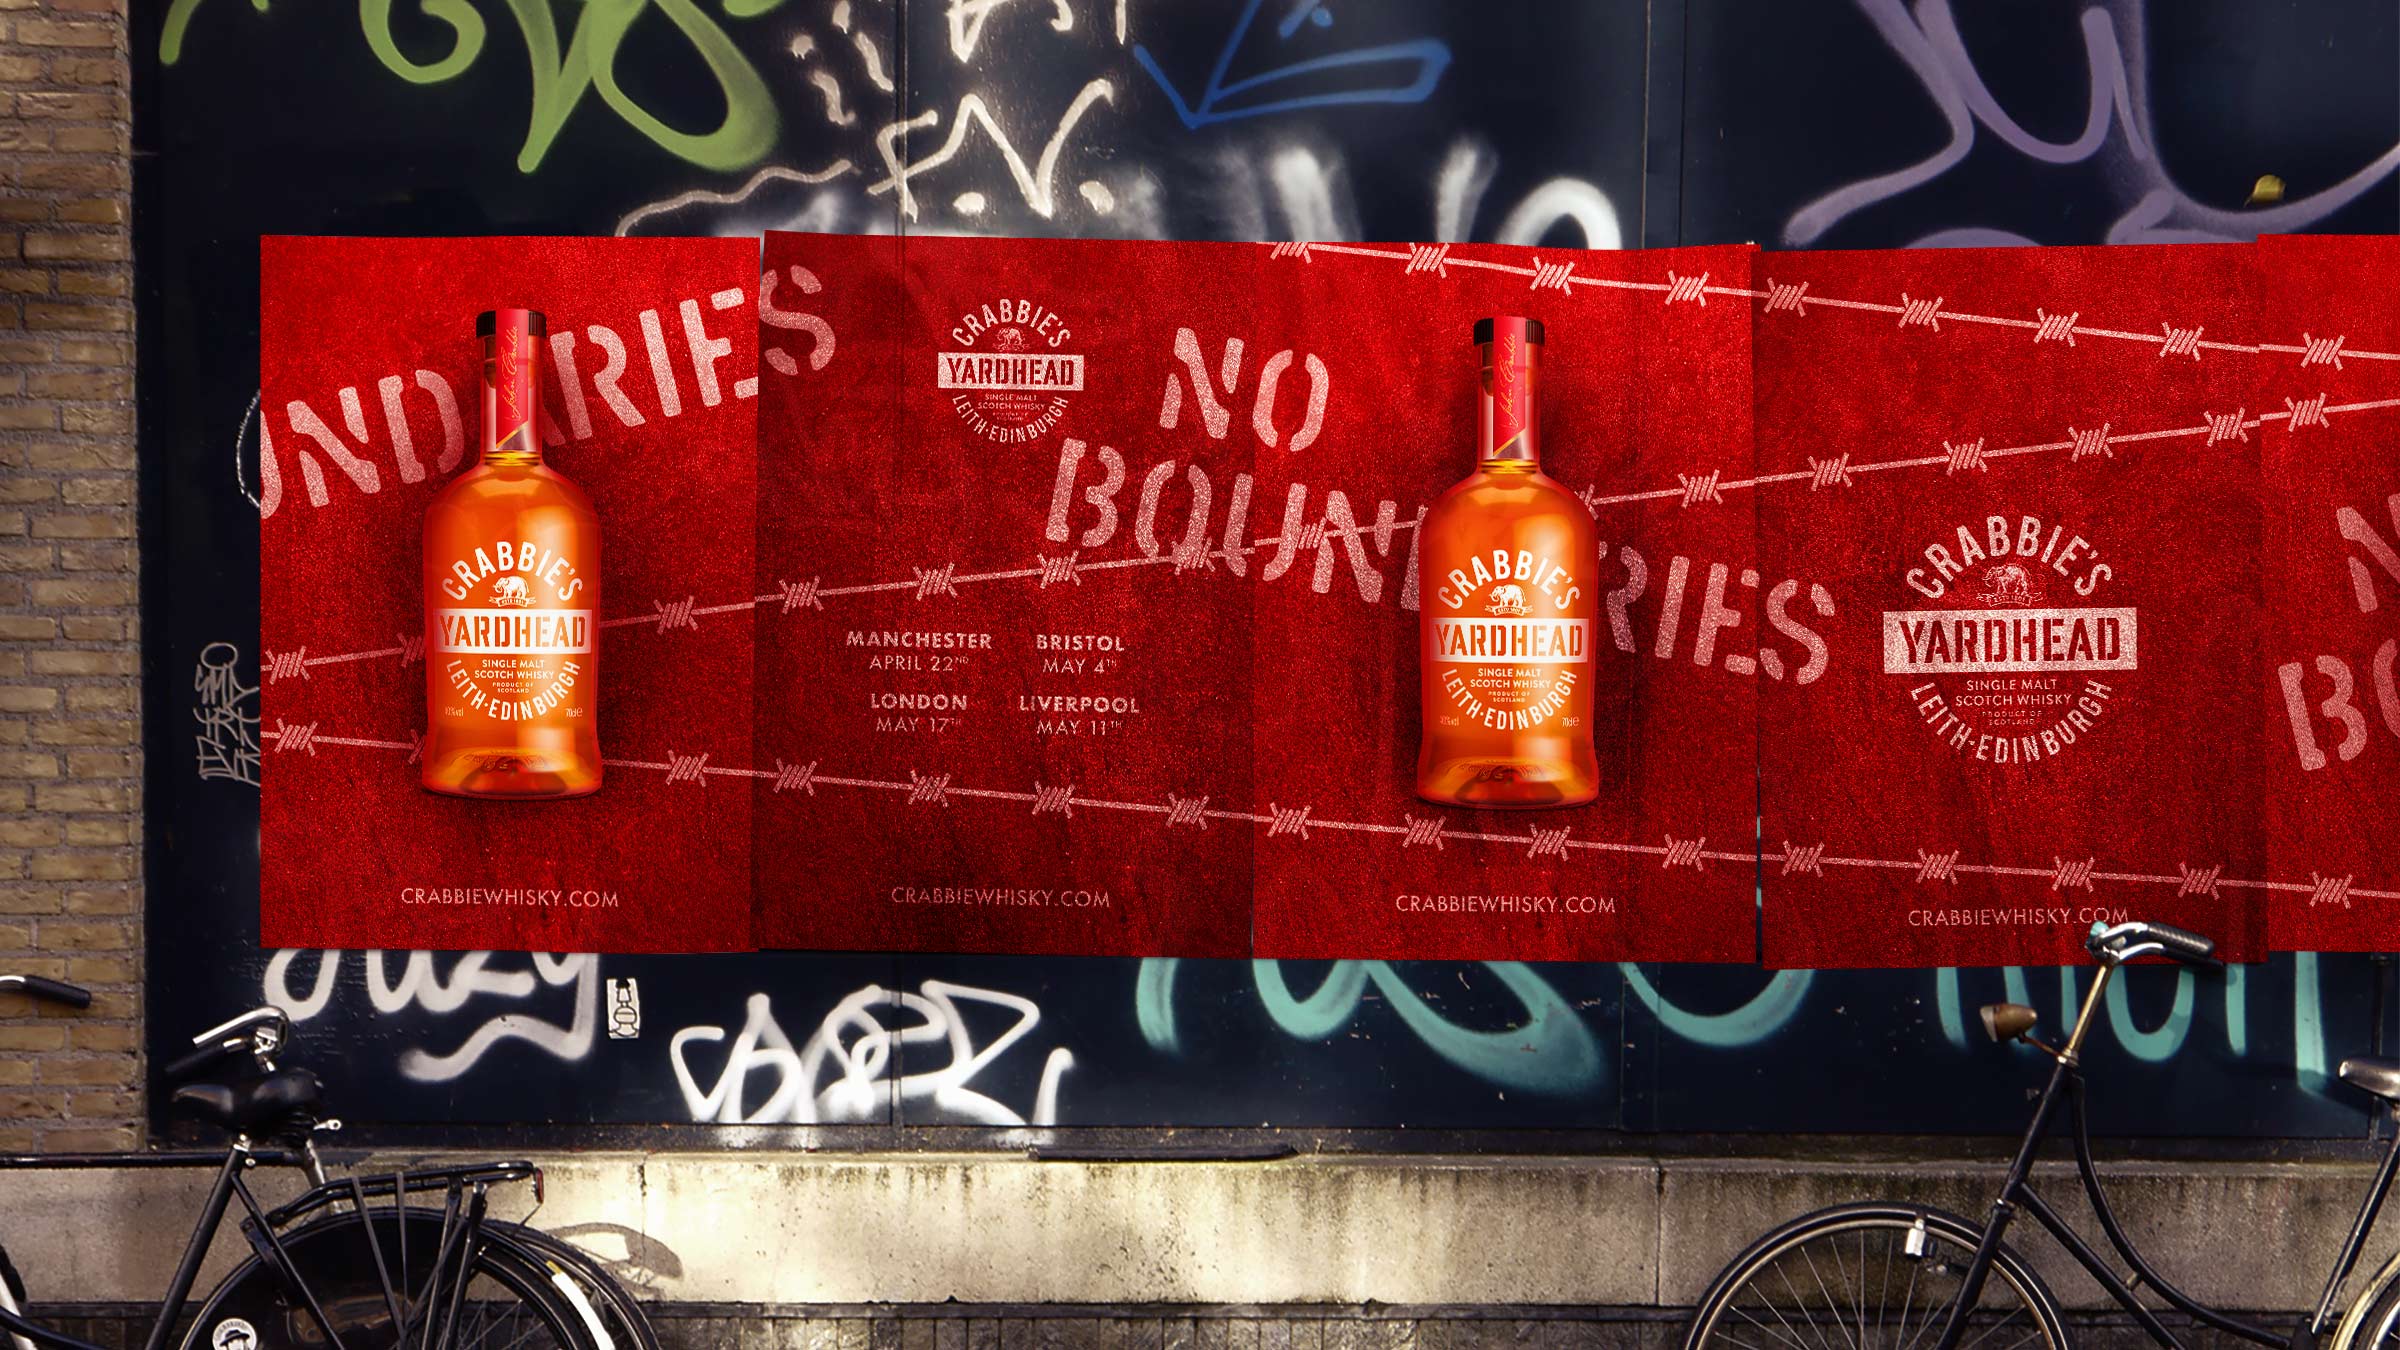 Crabbies Yardhead whisky launch campaign identity by Monumentum Brands